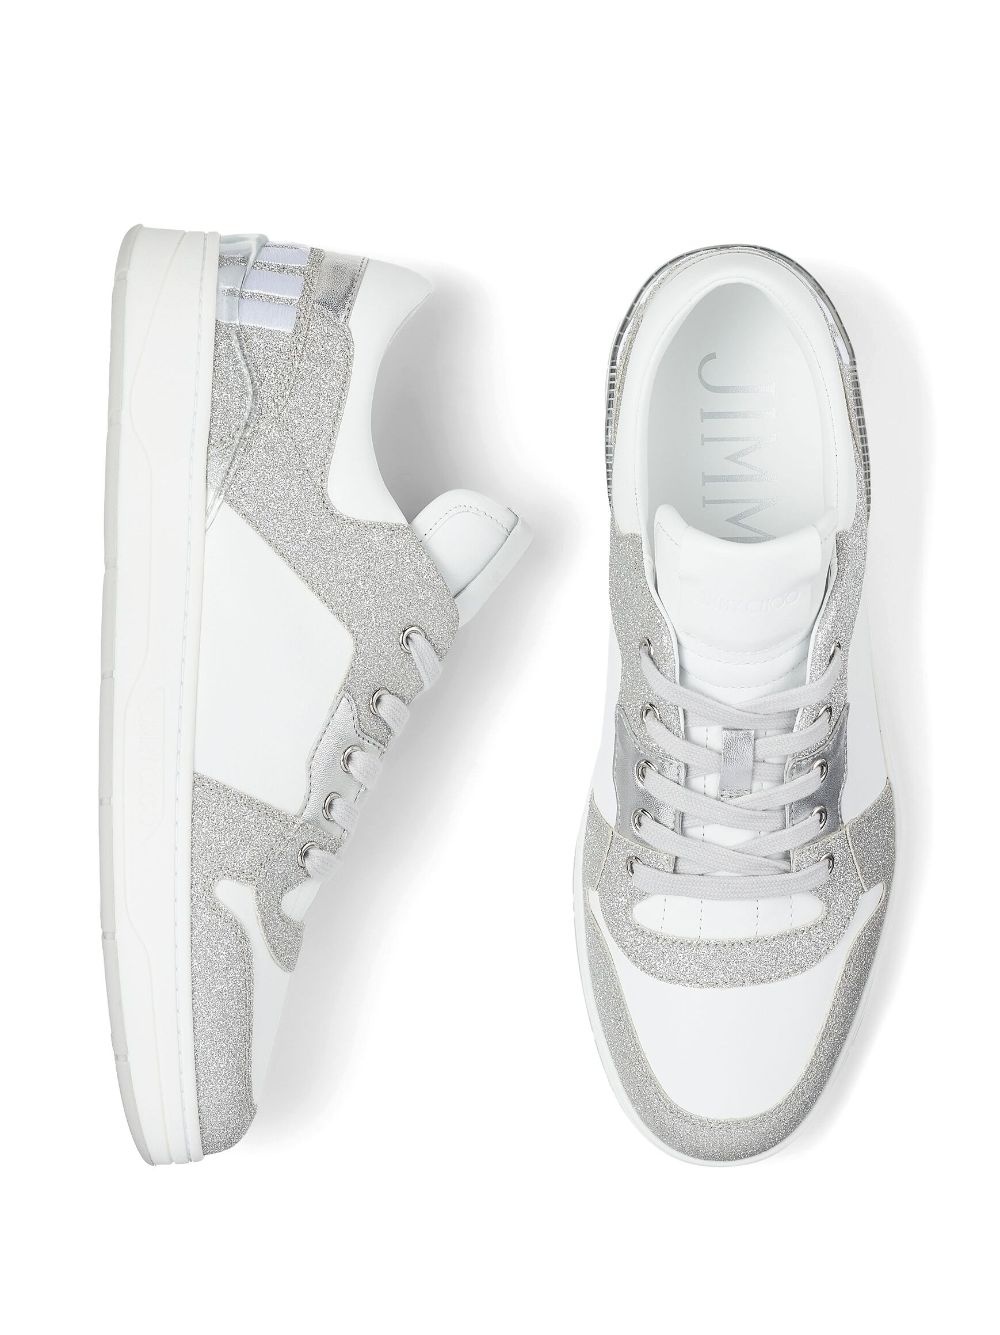 Florent leather sneakers - 3